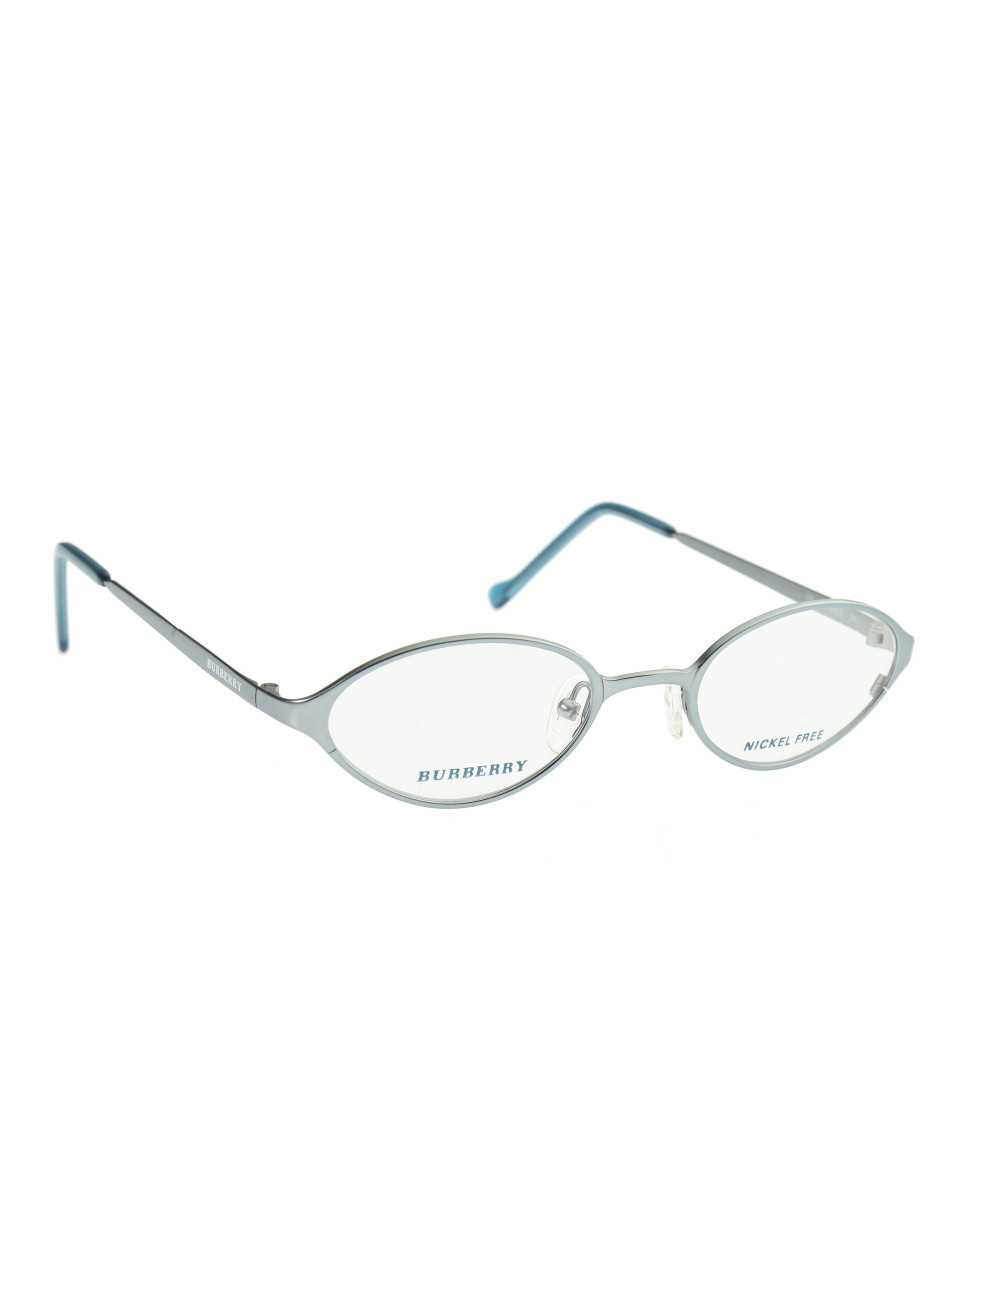 Burberry '90s Silver Metal Oval Frame Glasses